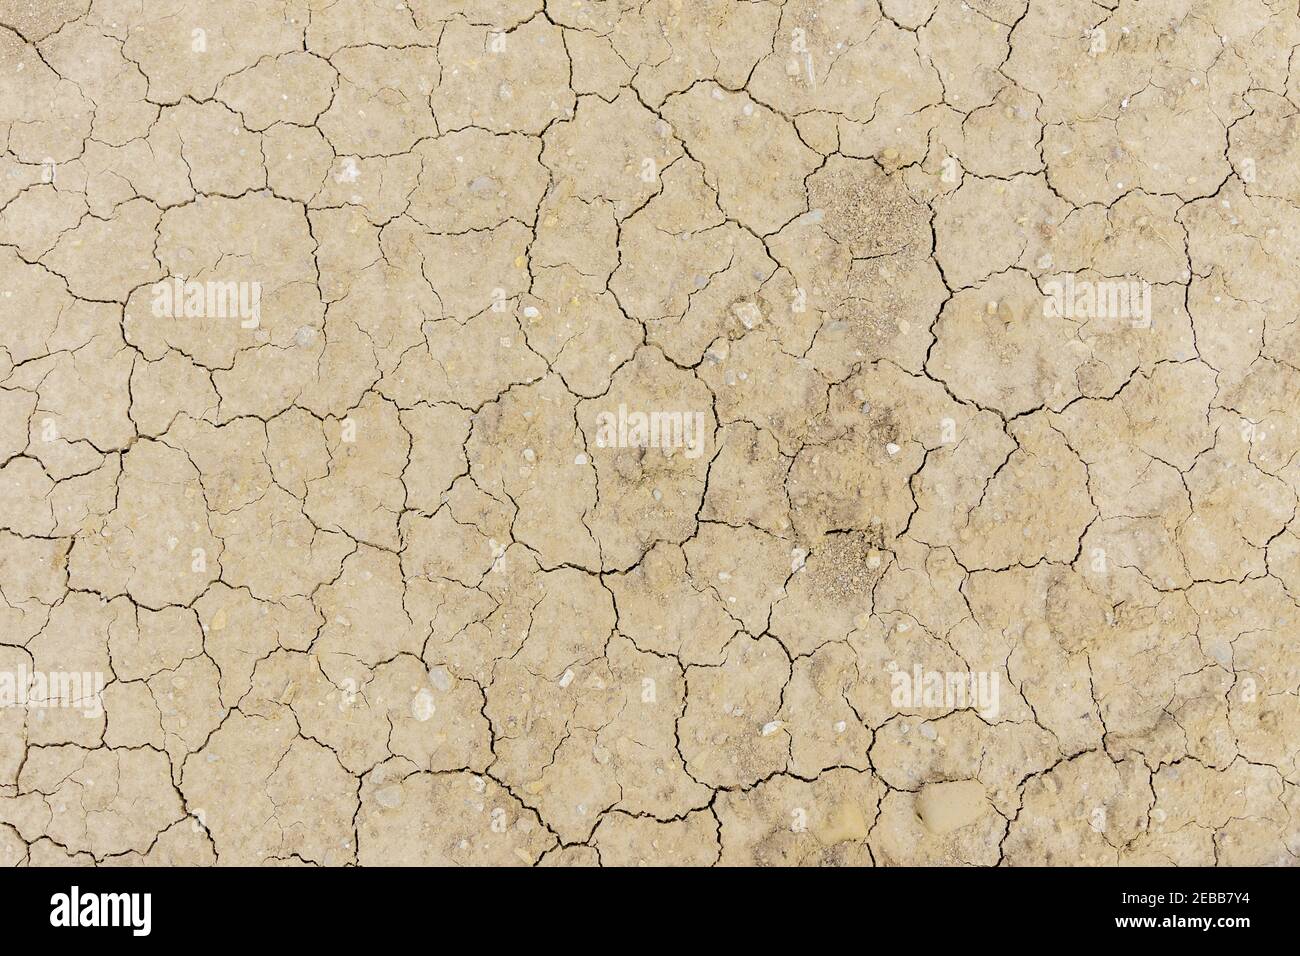 Texture of dry cracked earth surface. Cracked patch of land with no vegetation from above. Cracks in land as symbol of hot climate and drought. Global Stock Photo